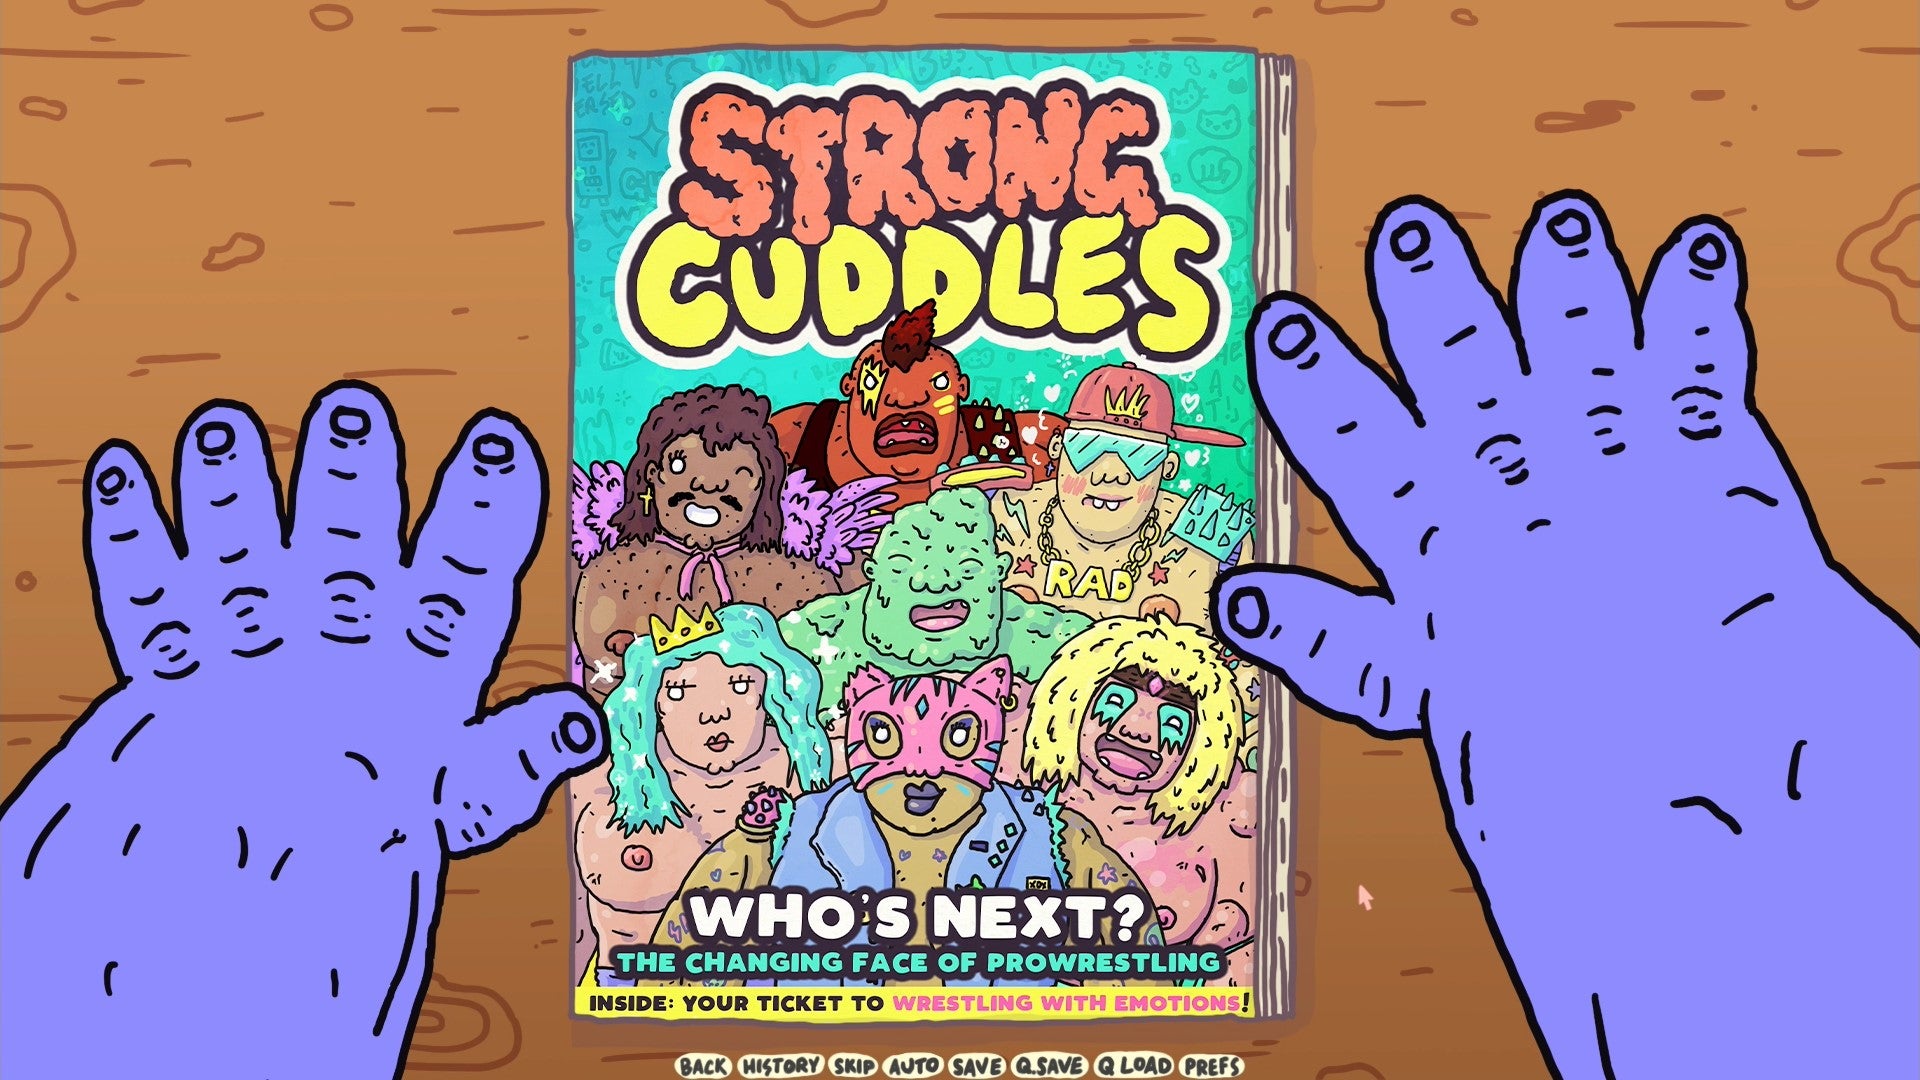 Your character's purple hands lay to the side of "Strong Cuddles" magazine, which shows all of WWE: New Kid On The Block's roster.